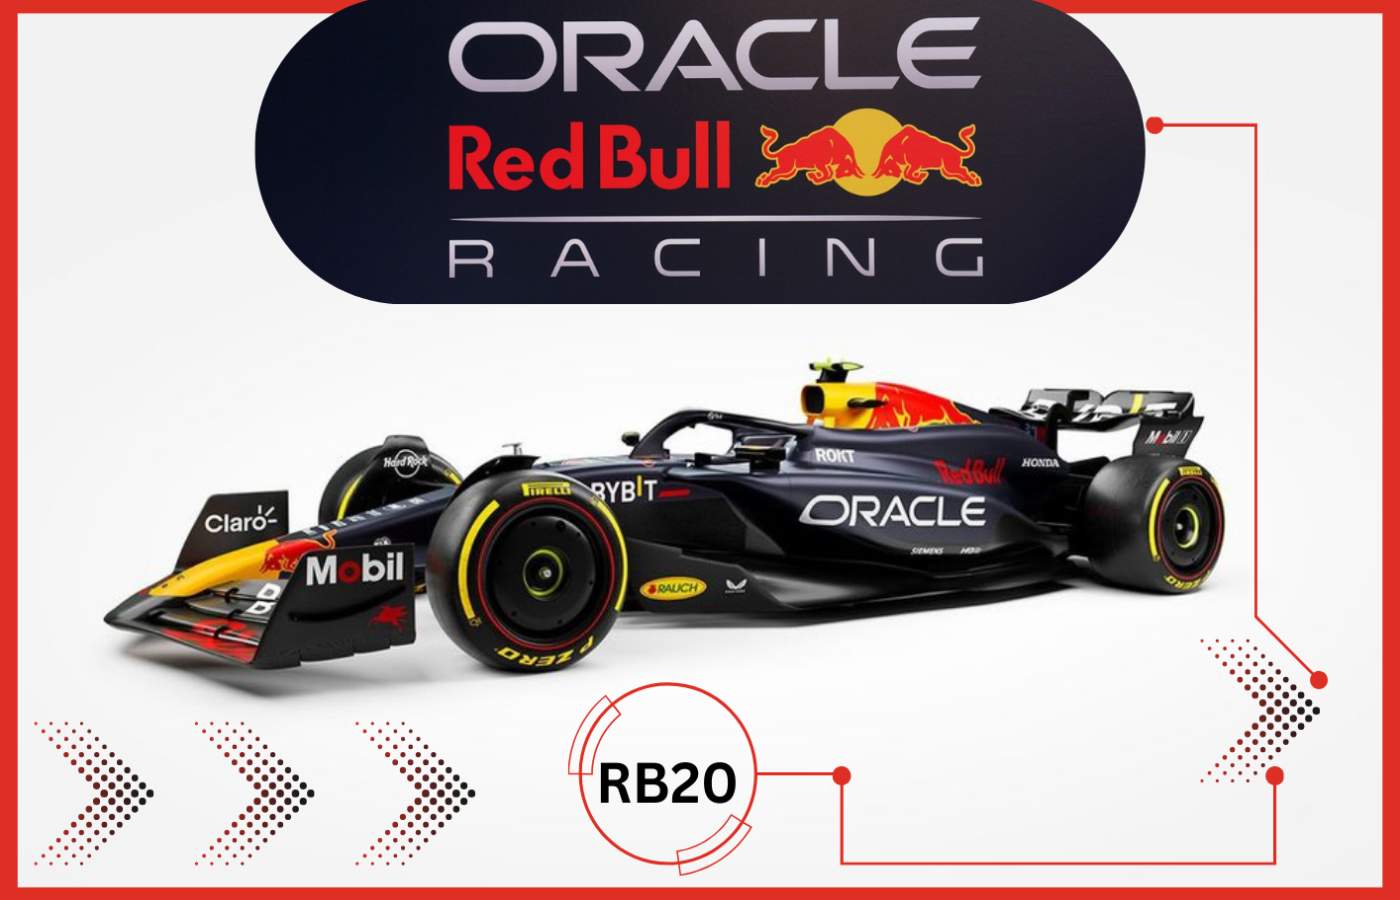 Fans react to Red Bull’s “Absolute monster” RB 20 ahead of next F1 season